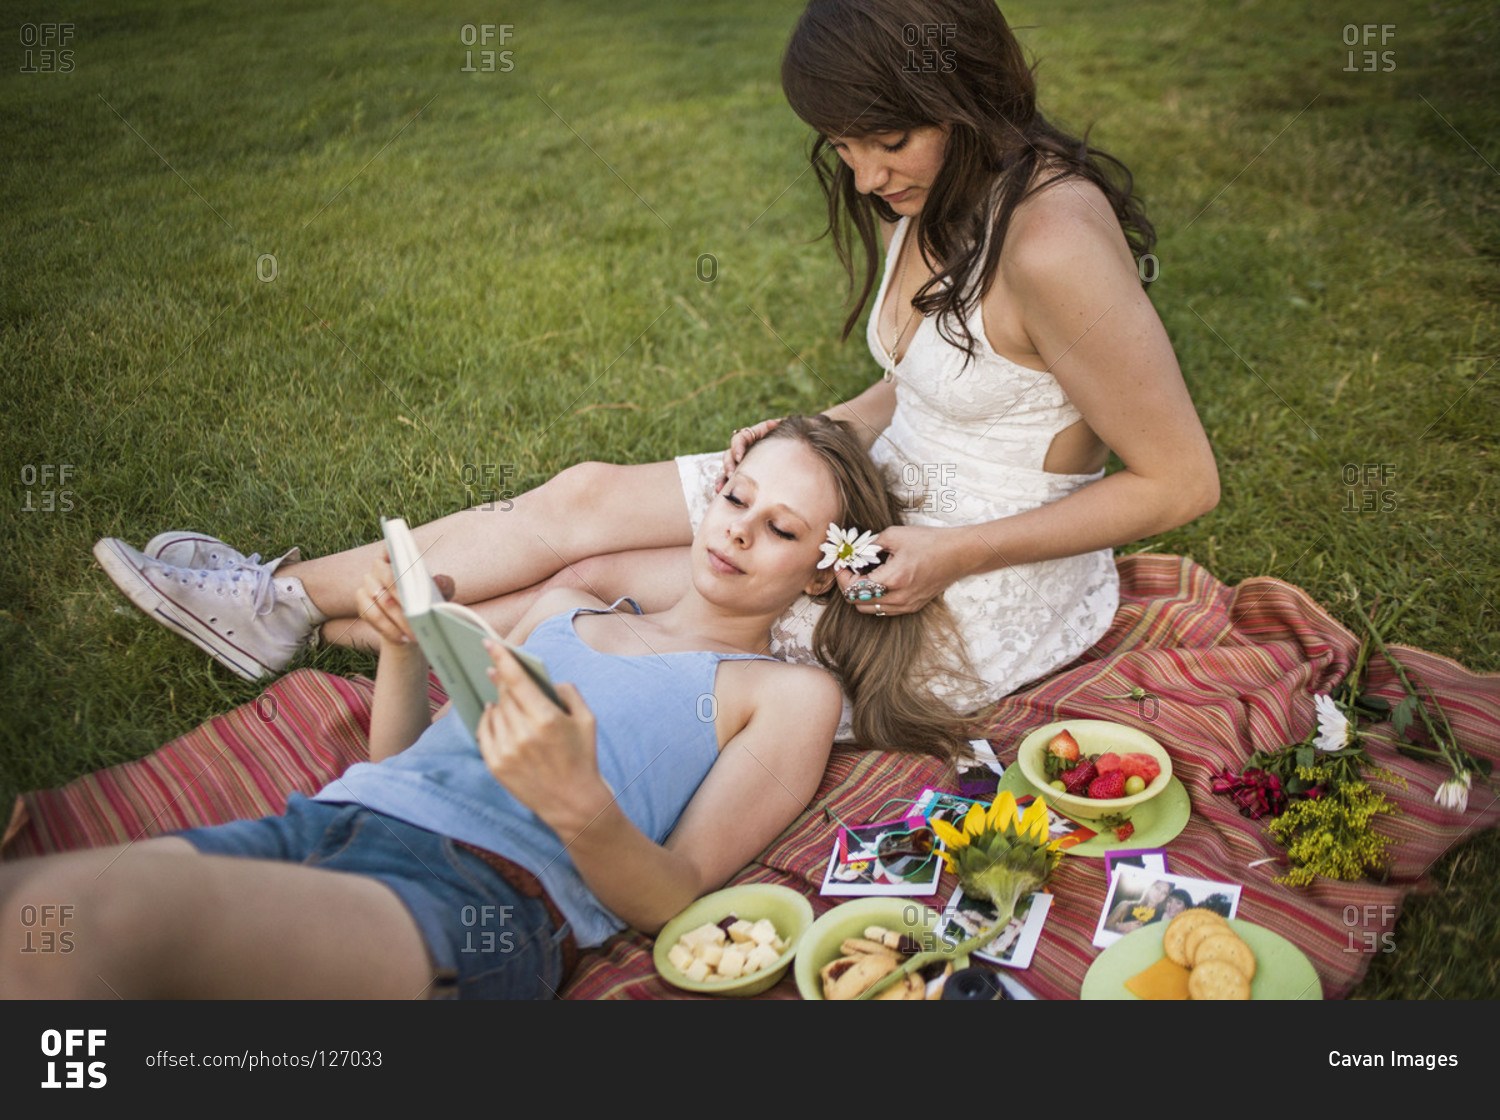 Picnic Couple - Sex with HIS WIFE AT A PICNIC (76 photos) - sex eporner pics